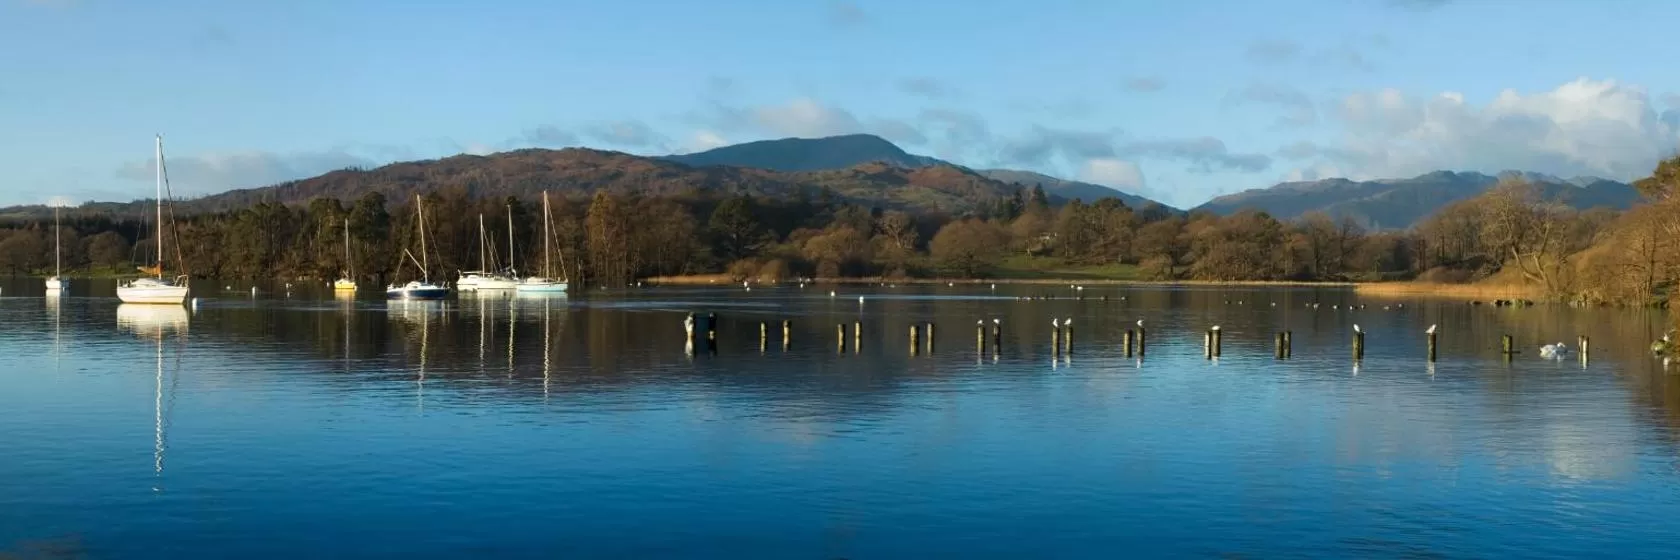 Bowness-on-Windermere, Cumbria Hotels